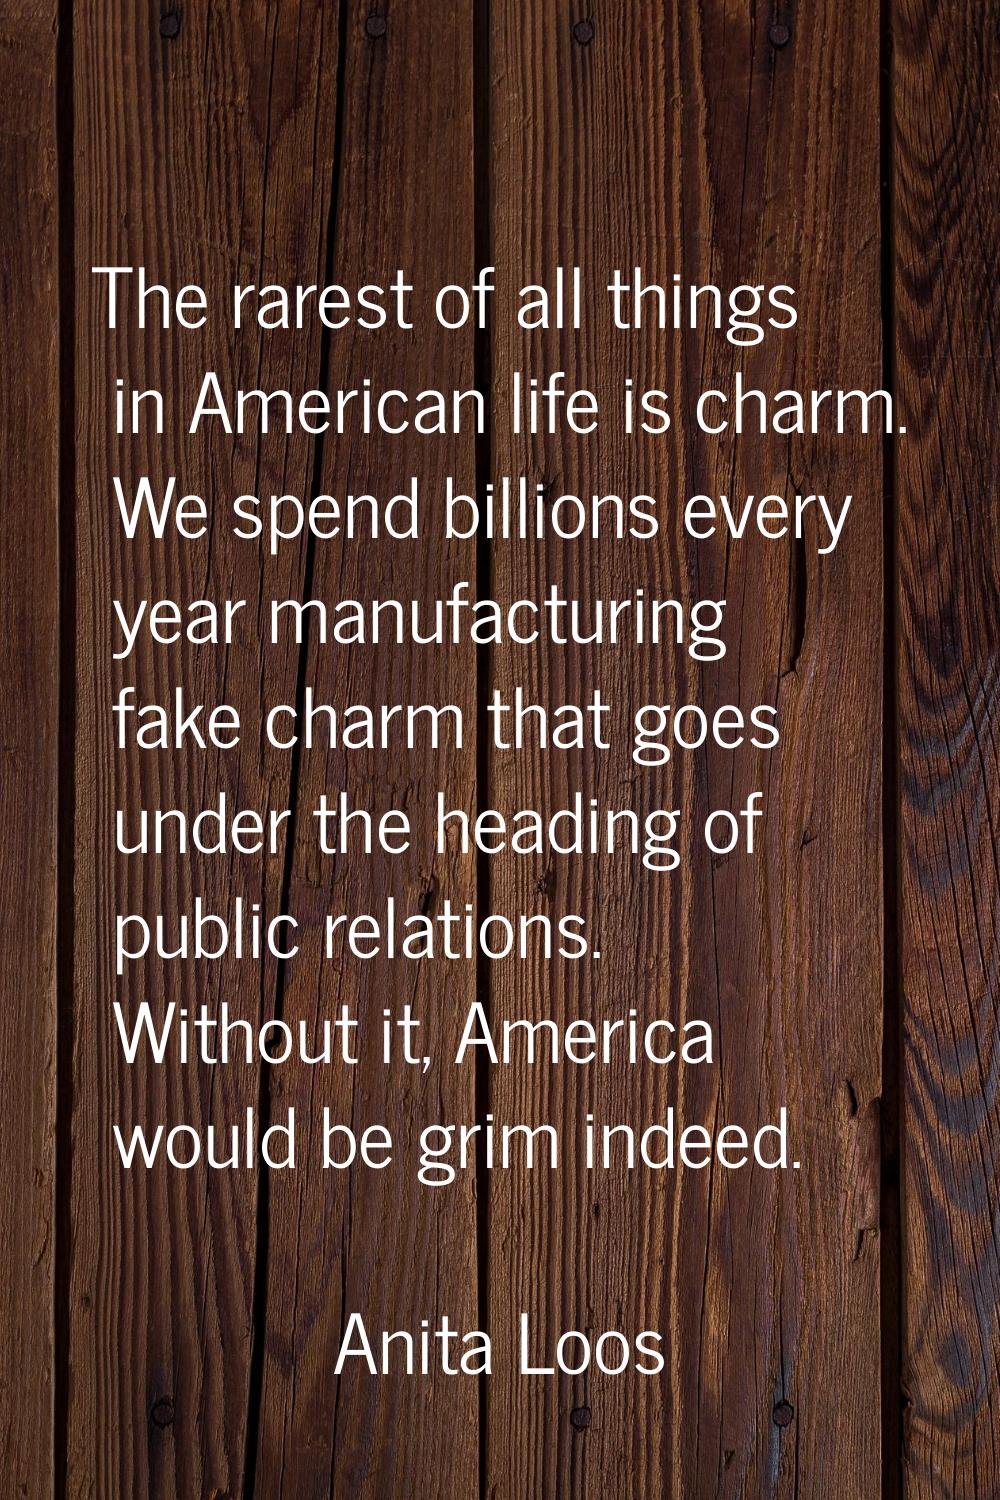 The rarest of all things in American life is charm. We spend billions every year manufacturing fake